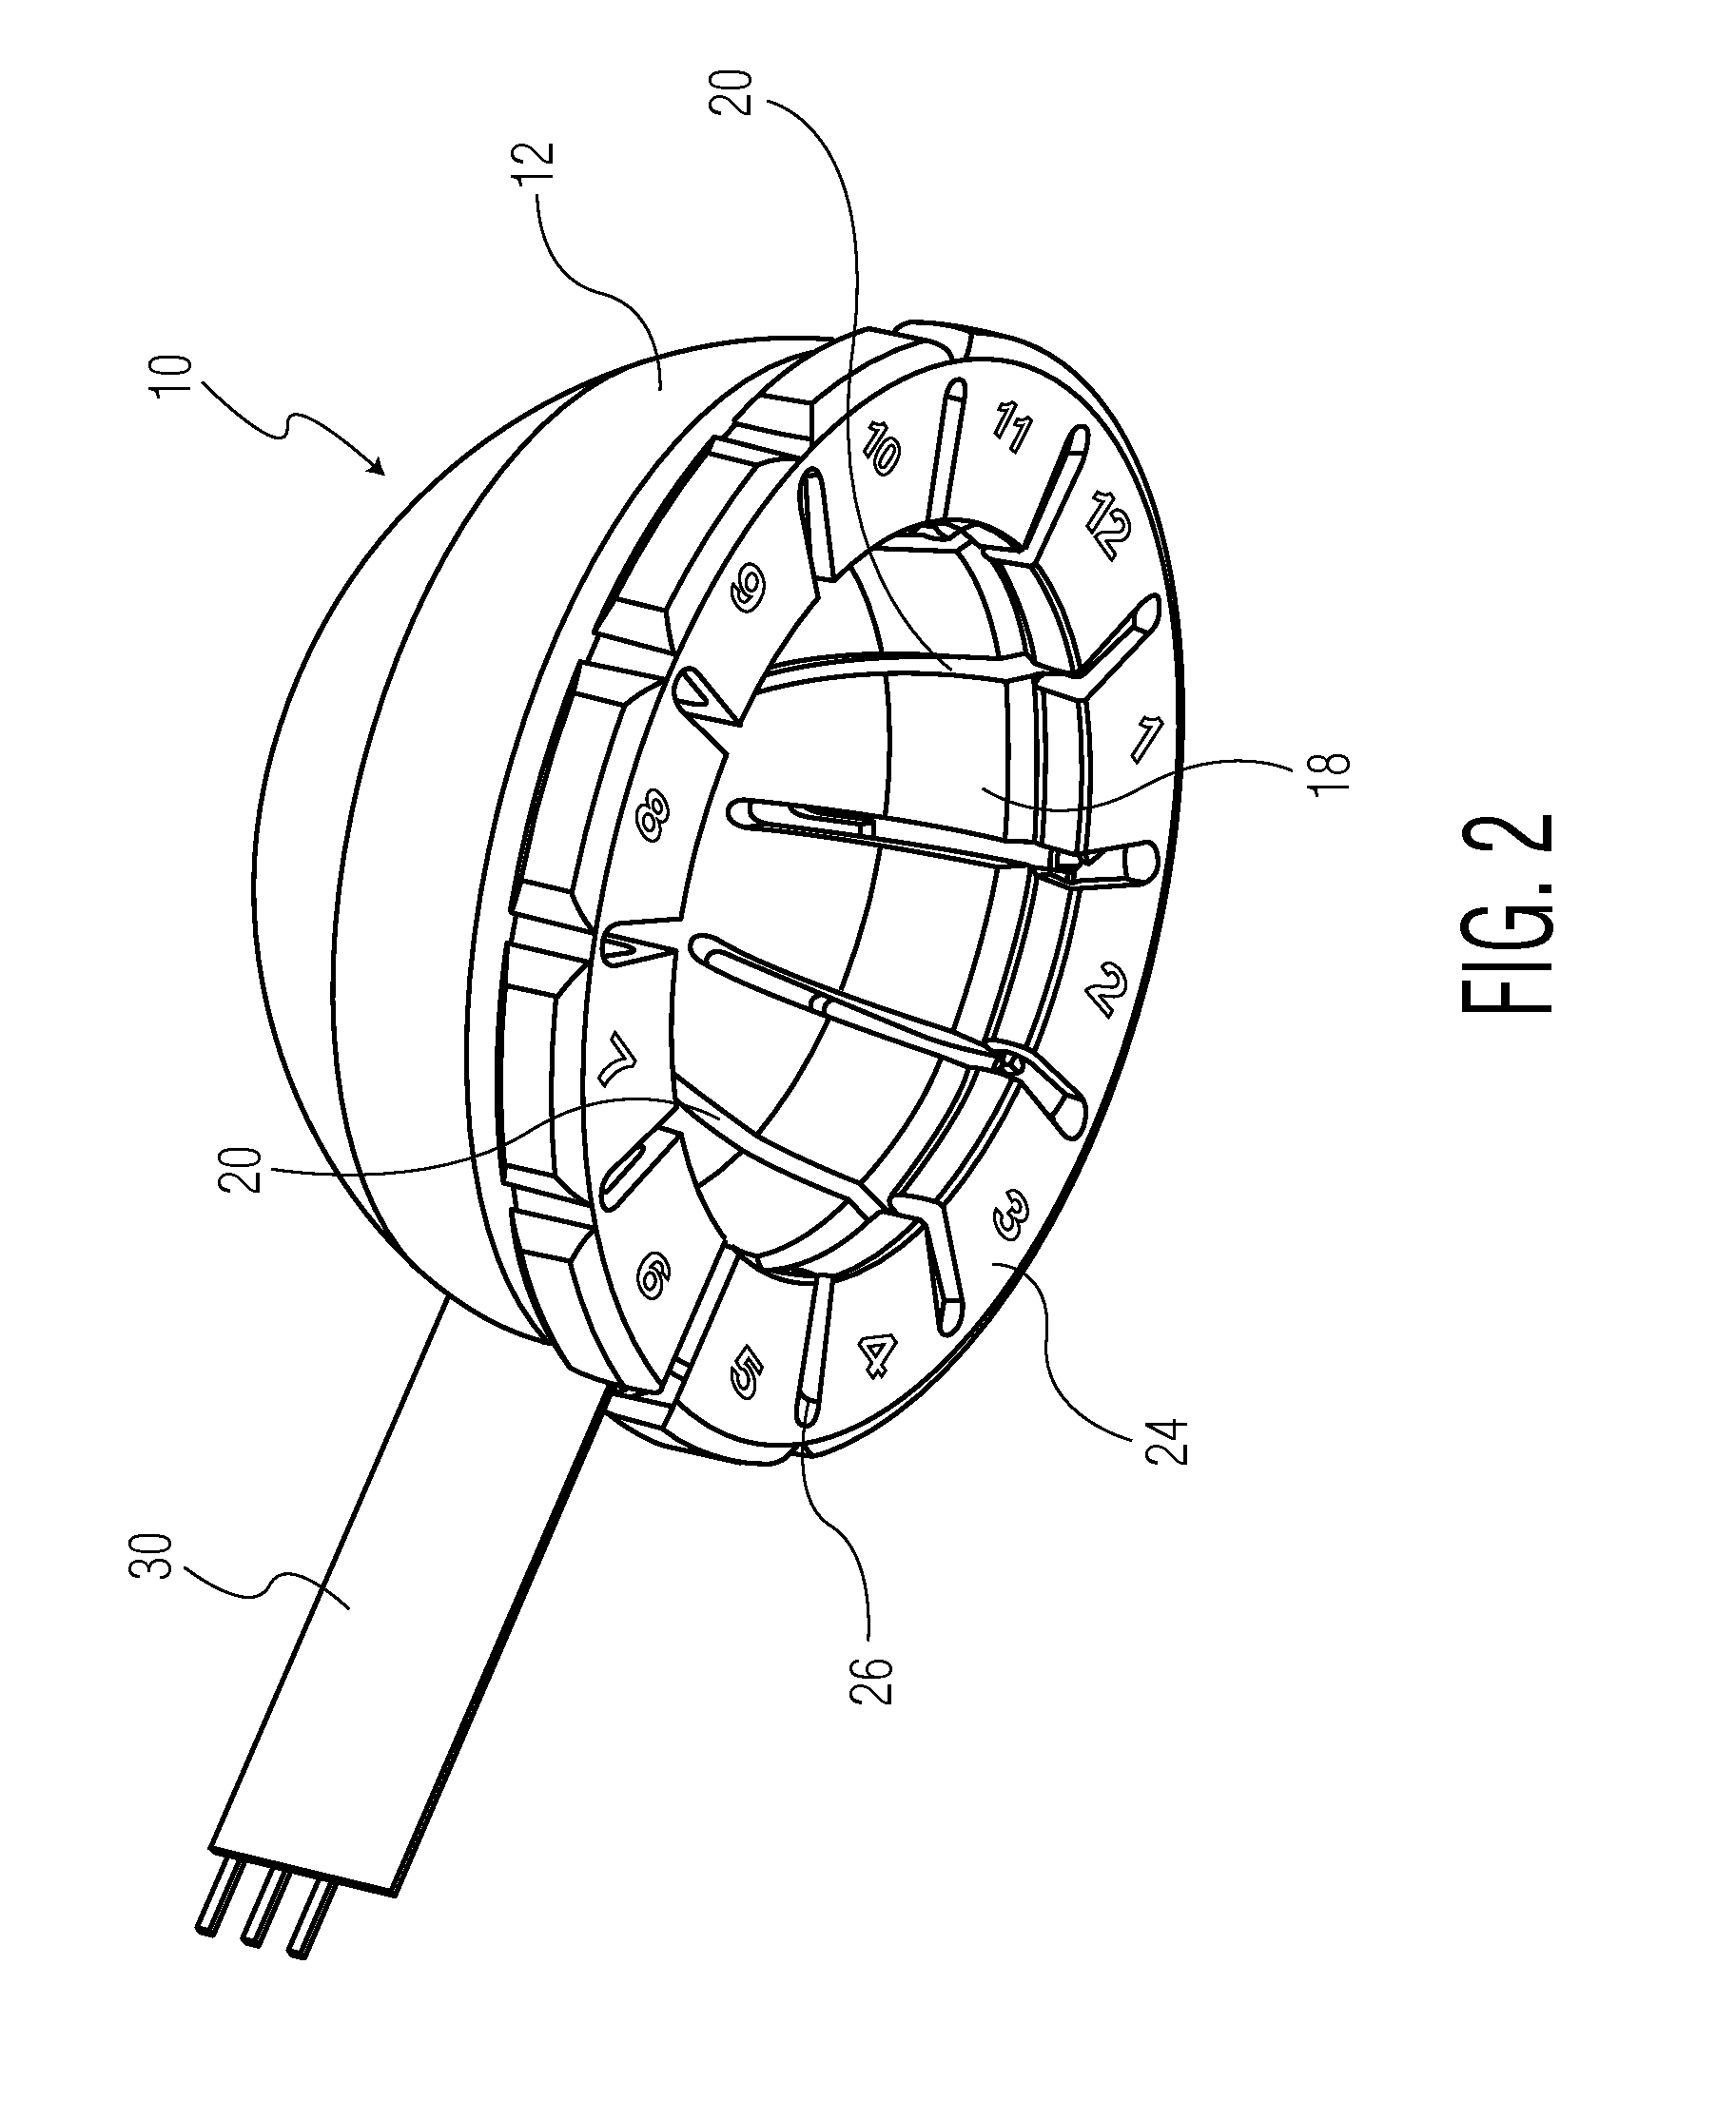 Acetabular cup positioning device